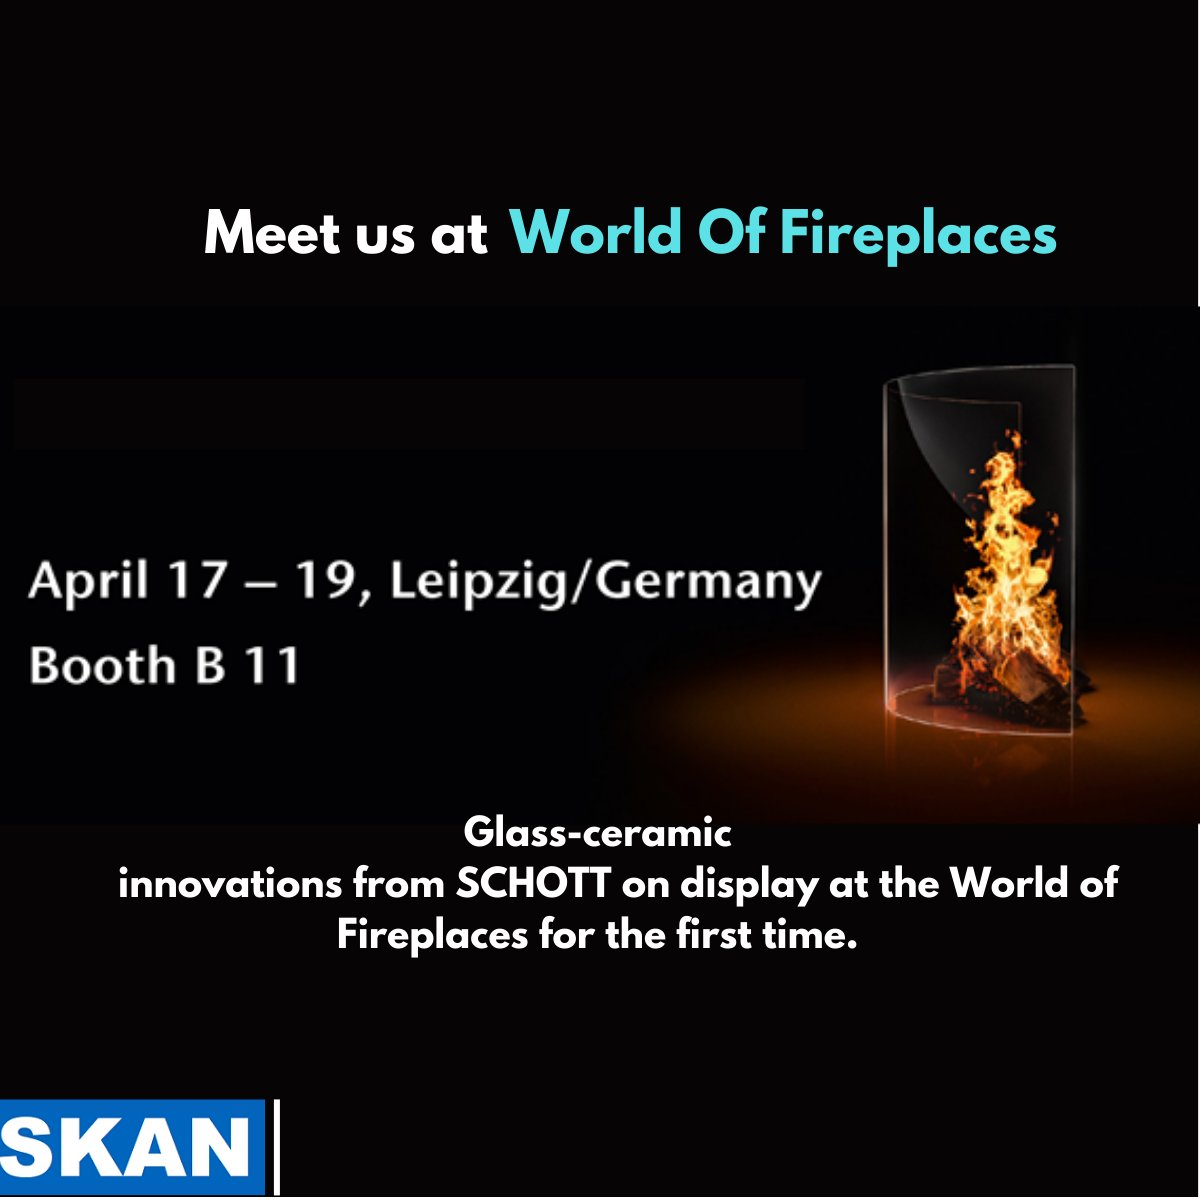 It's Finally here ! The World of Fireplaces will open its doors today in Germany. Check out our SCHOTT ROBAX® gallery for some exciting new inspiration. See you there !😊

#Worldoffireplaces #wof2023 #fireplaces #stove #robax #germany